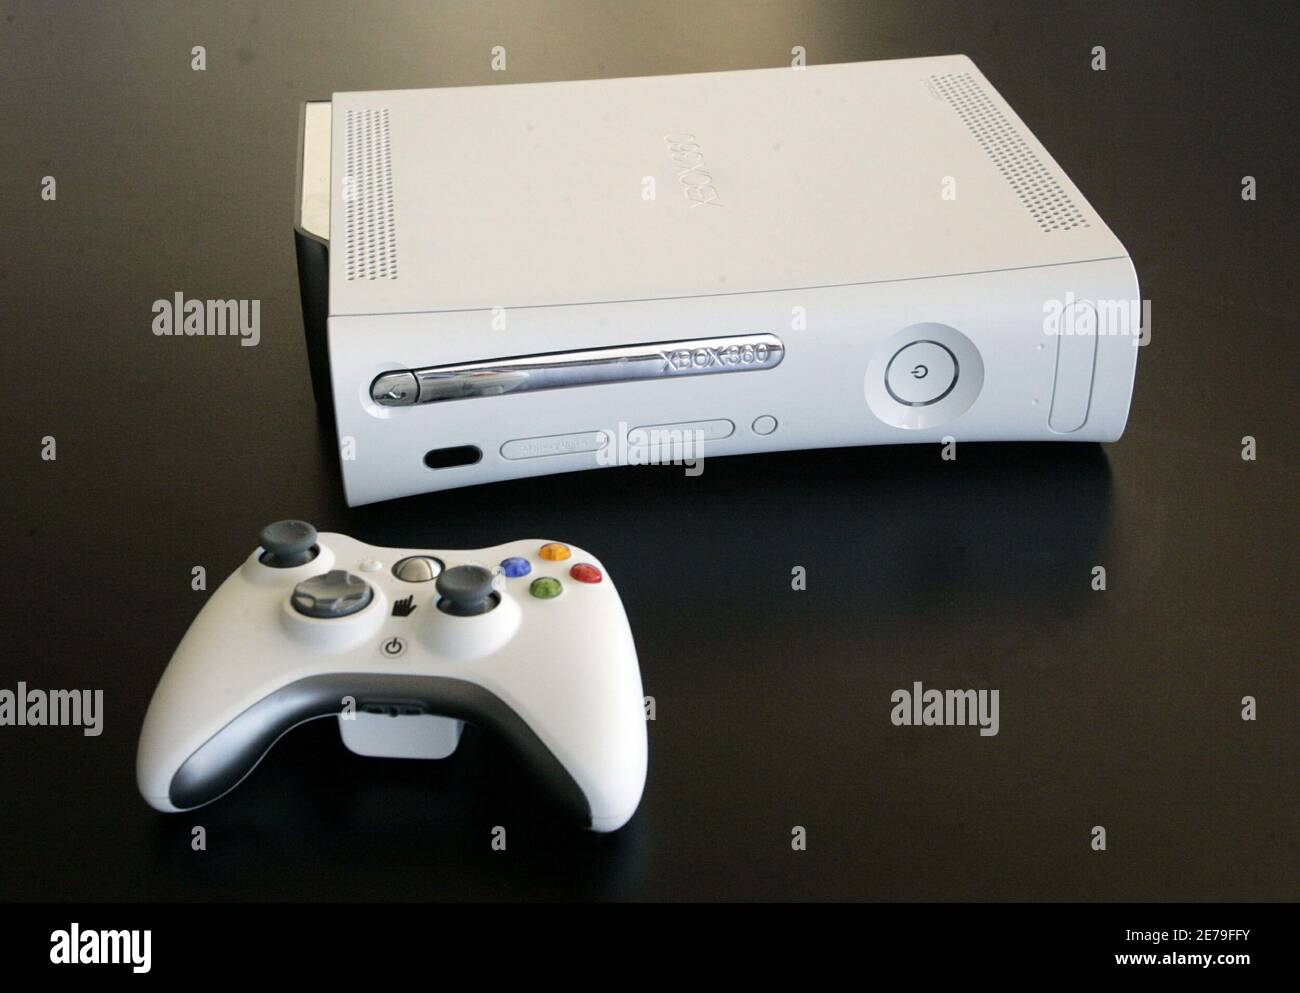 Microsoft Corp. Xbox 360 video game console and controller are pictured in  Los Angeles November 18, 2005. [Microsoft hopes to gain an advantage over  rivals Sony Corp. and Nintendo Co. Ltd.] by